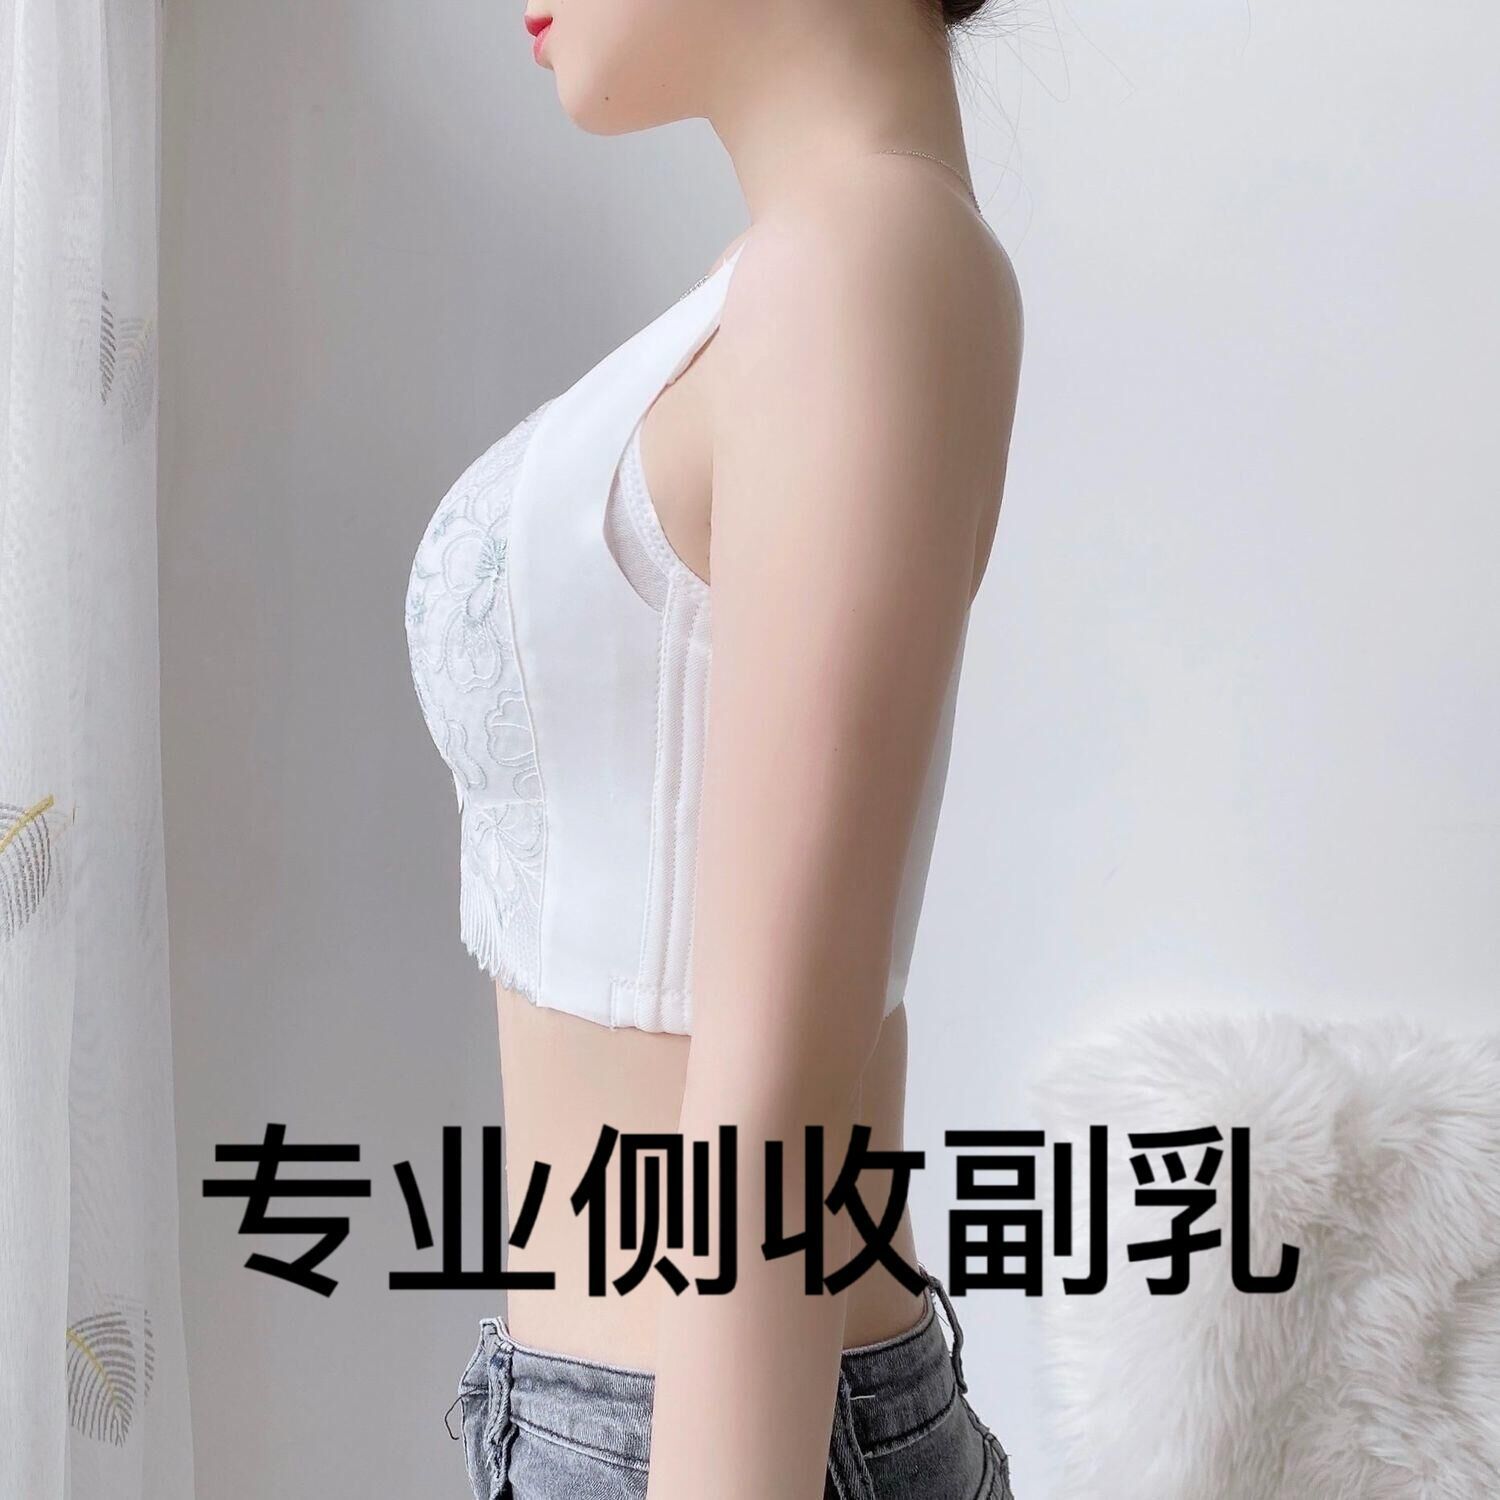 Underwear women's summer thin section big breasts show small side close beautiful back gathered breasts anti-sagging adjustment corrective bra